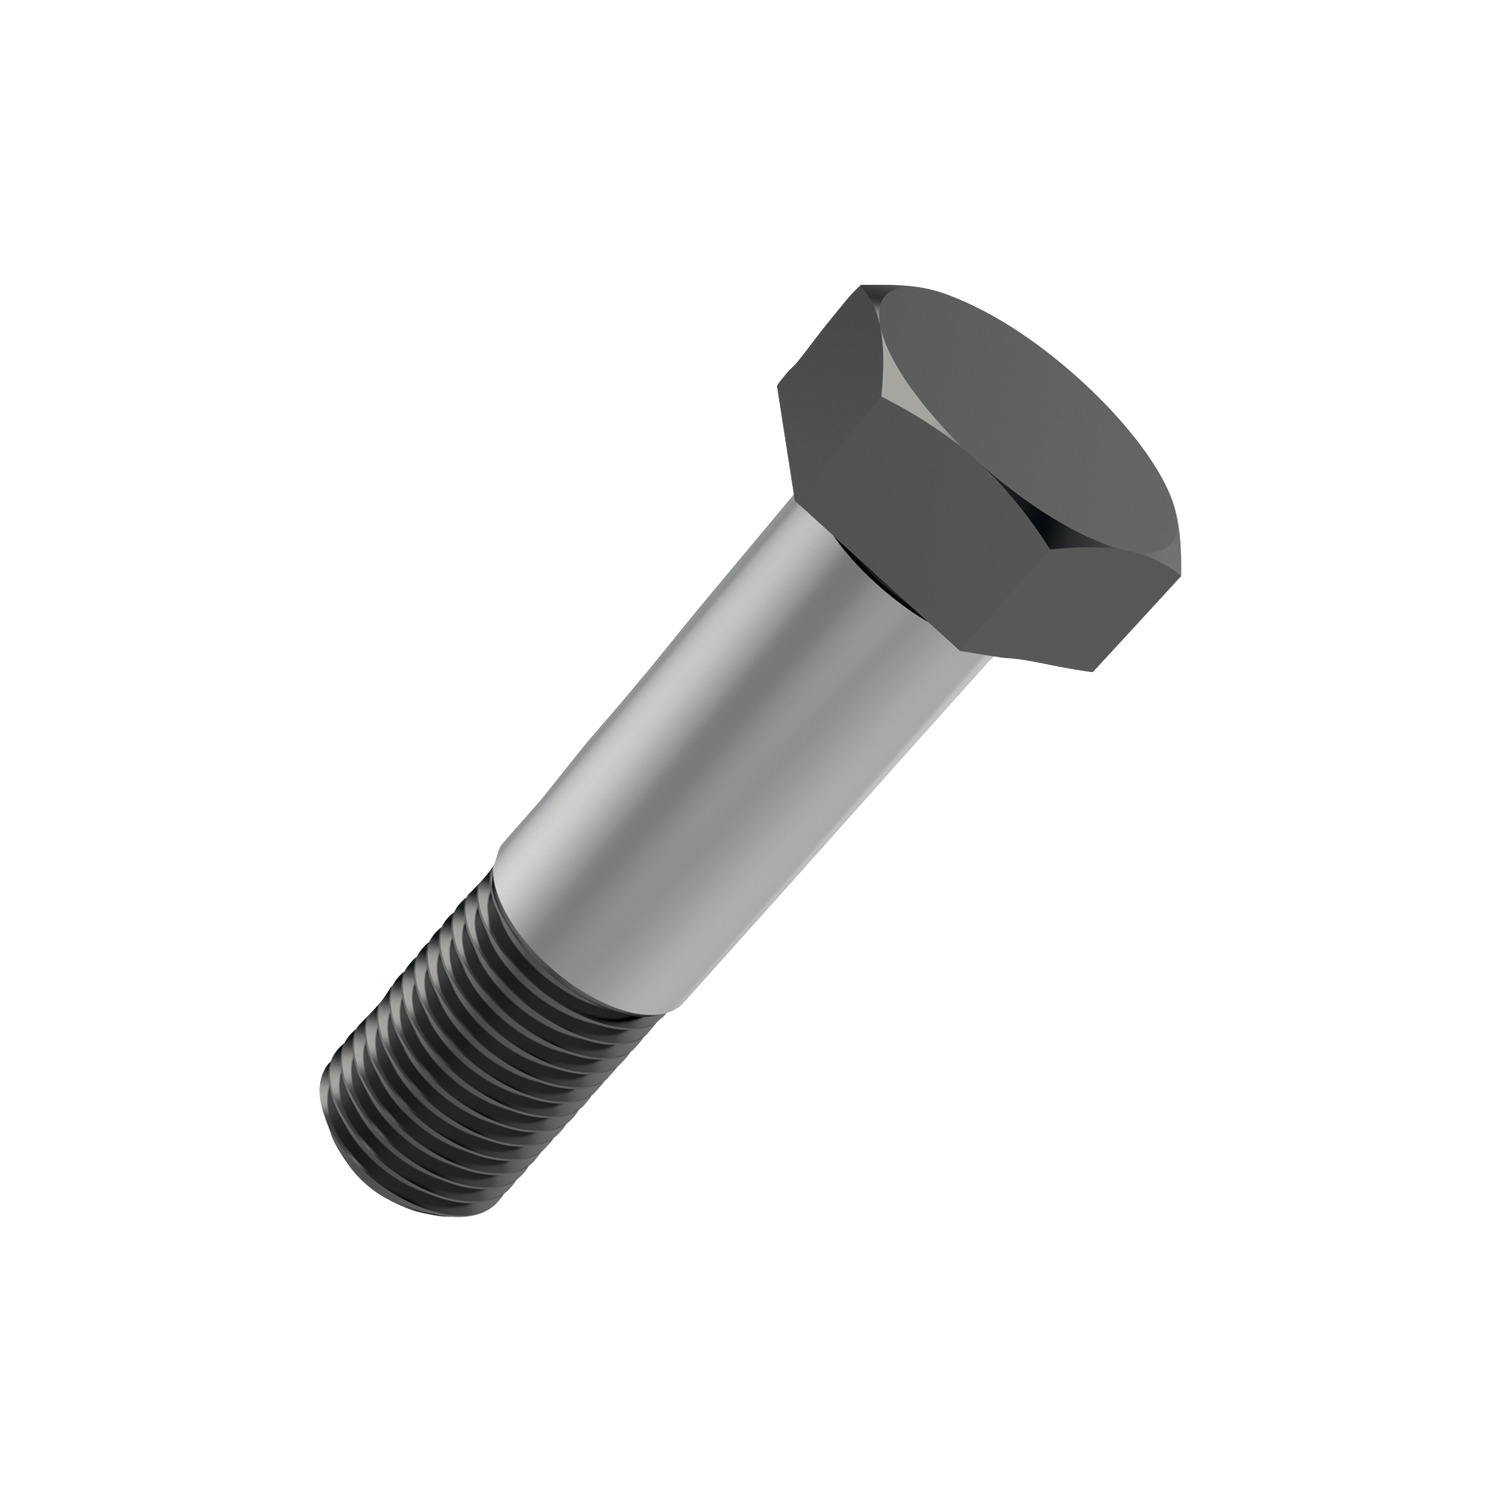 Steel Shoulder Bolts See all steel shoulder bolts here - we manufacture these in construction grade 8.8 steel and high tensile grades 10.9 and 12.9 steel. Protective finishes and special sizes can be manufactured on request.